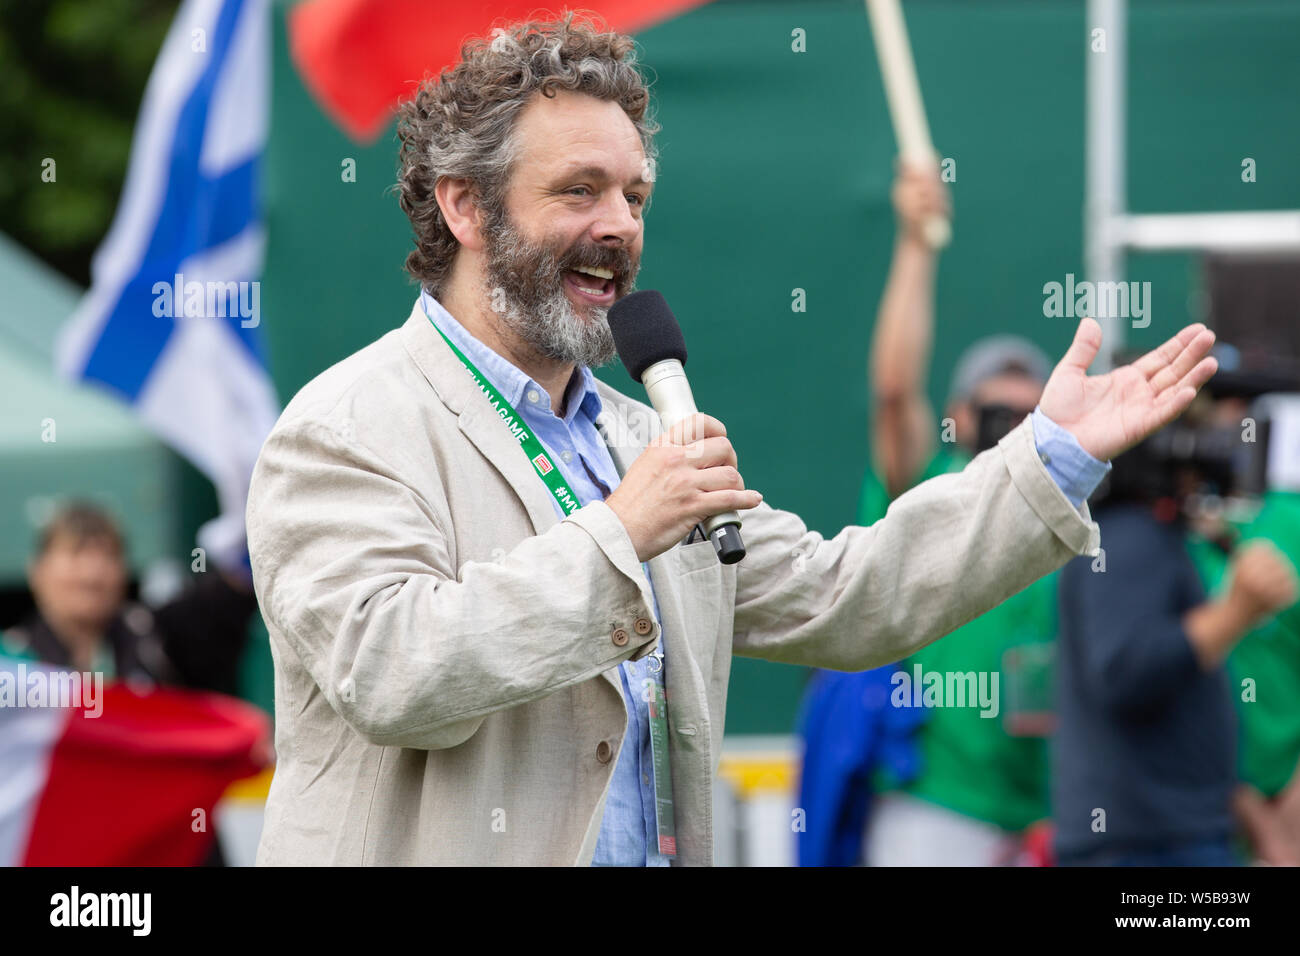 Cardiff, Wales. 27th July, 2019. Michael Sheen at the Homeless World Cup Opening Ceremony. Football teams from more than 50 countries compete in the Homeless World Cup at Cardiff's iconic Bute Park, Wales, UK Credit: Tracey Paddison/Alamy Live News Stock Photo